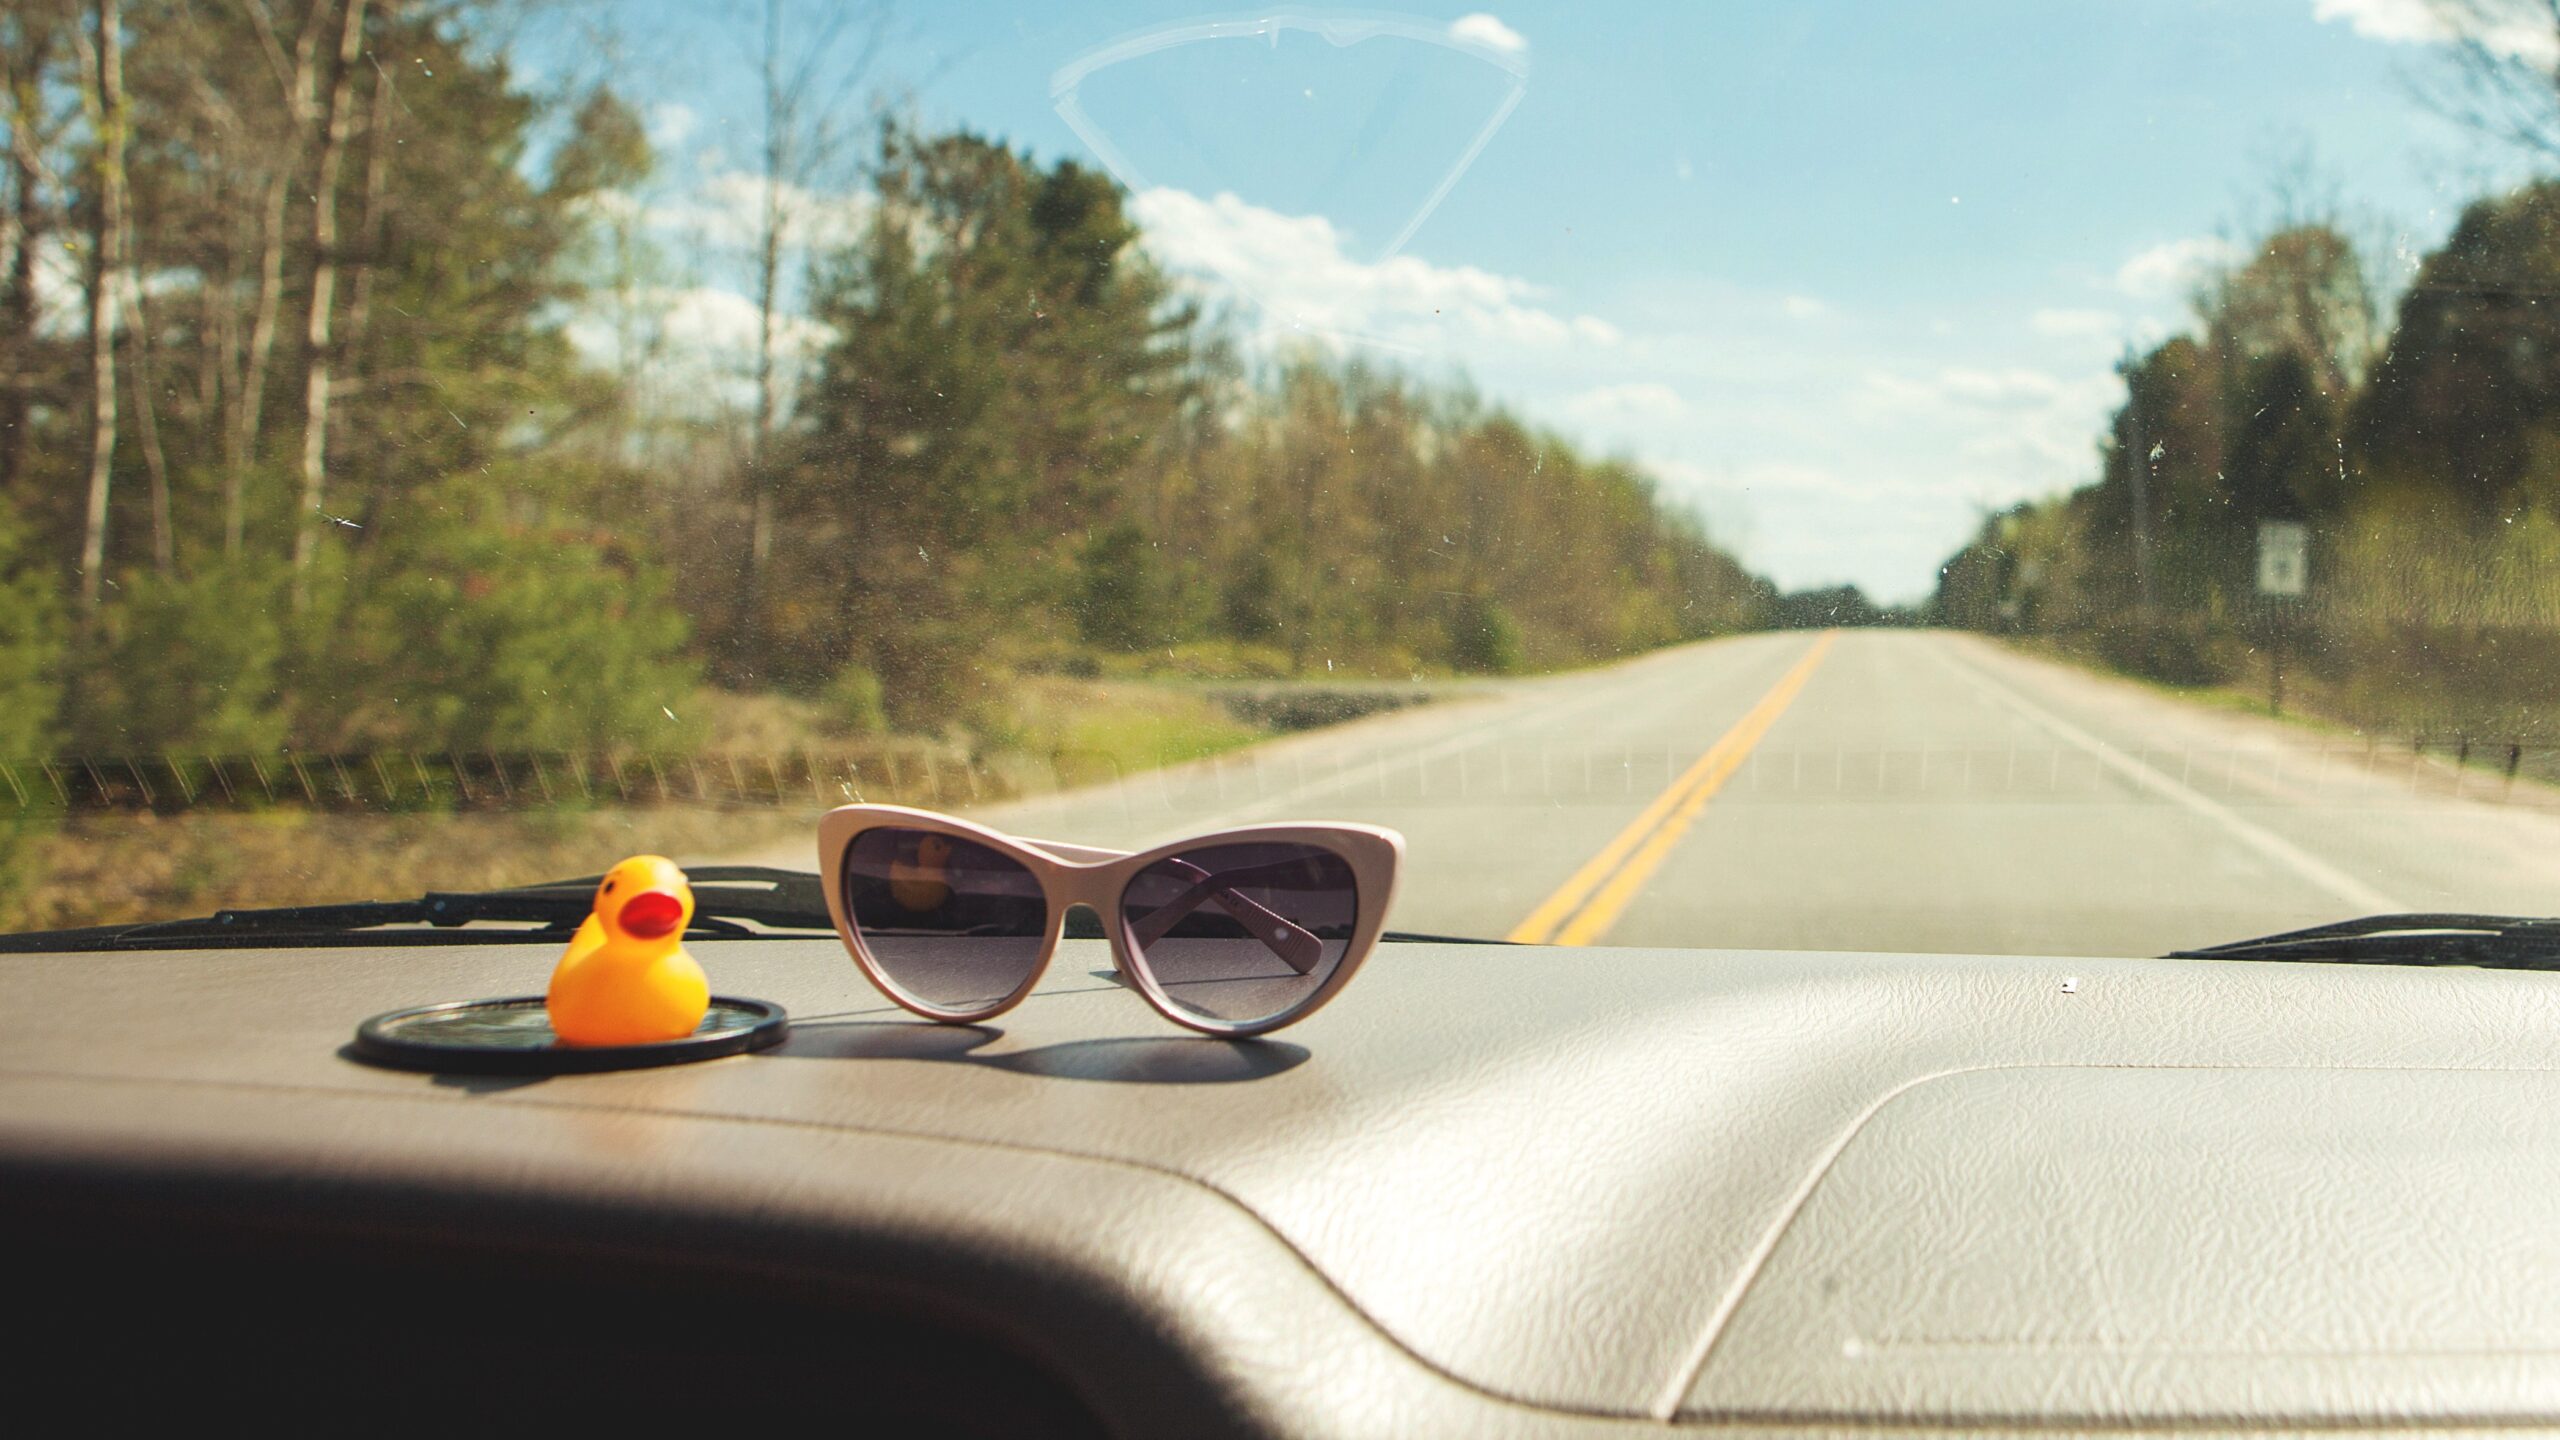 an old car dashboard with sunglasses and rubber ducky, sunny country scene in windshield